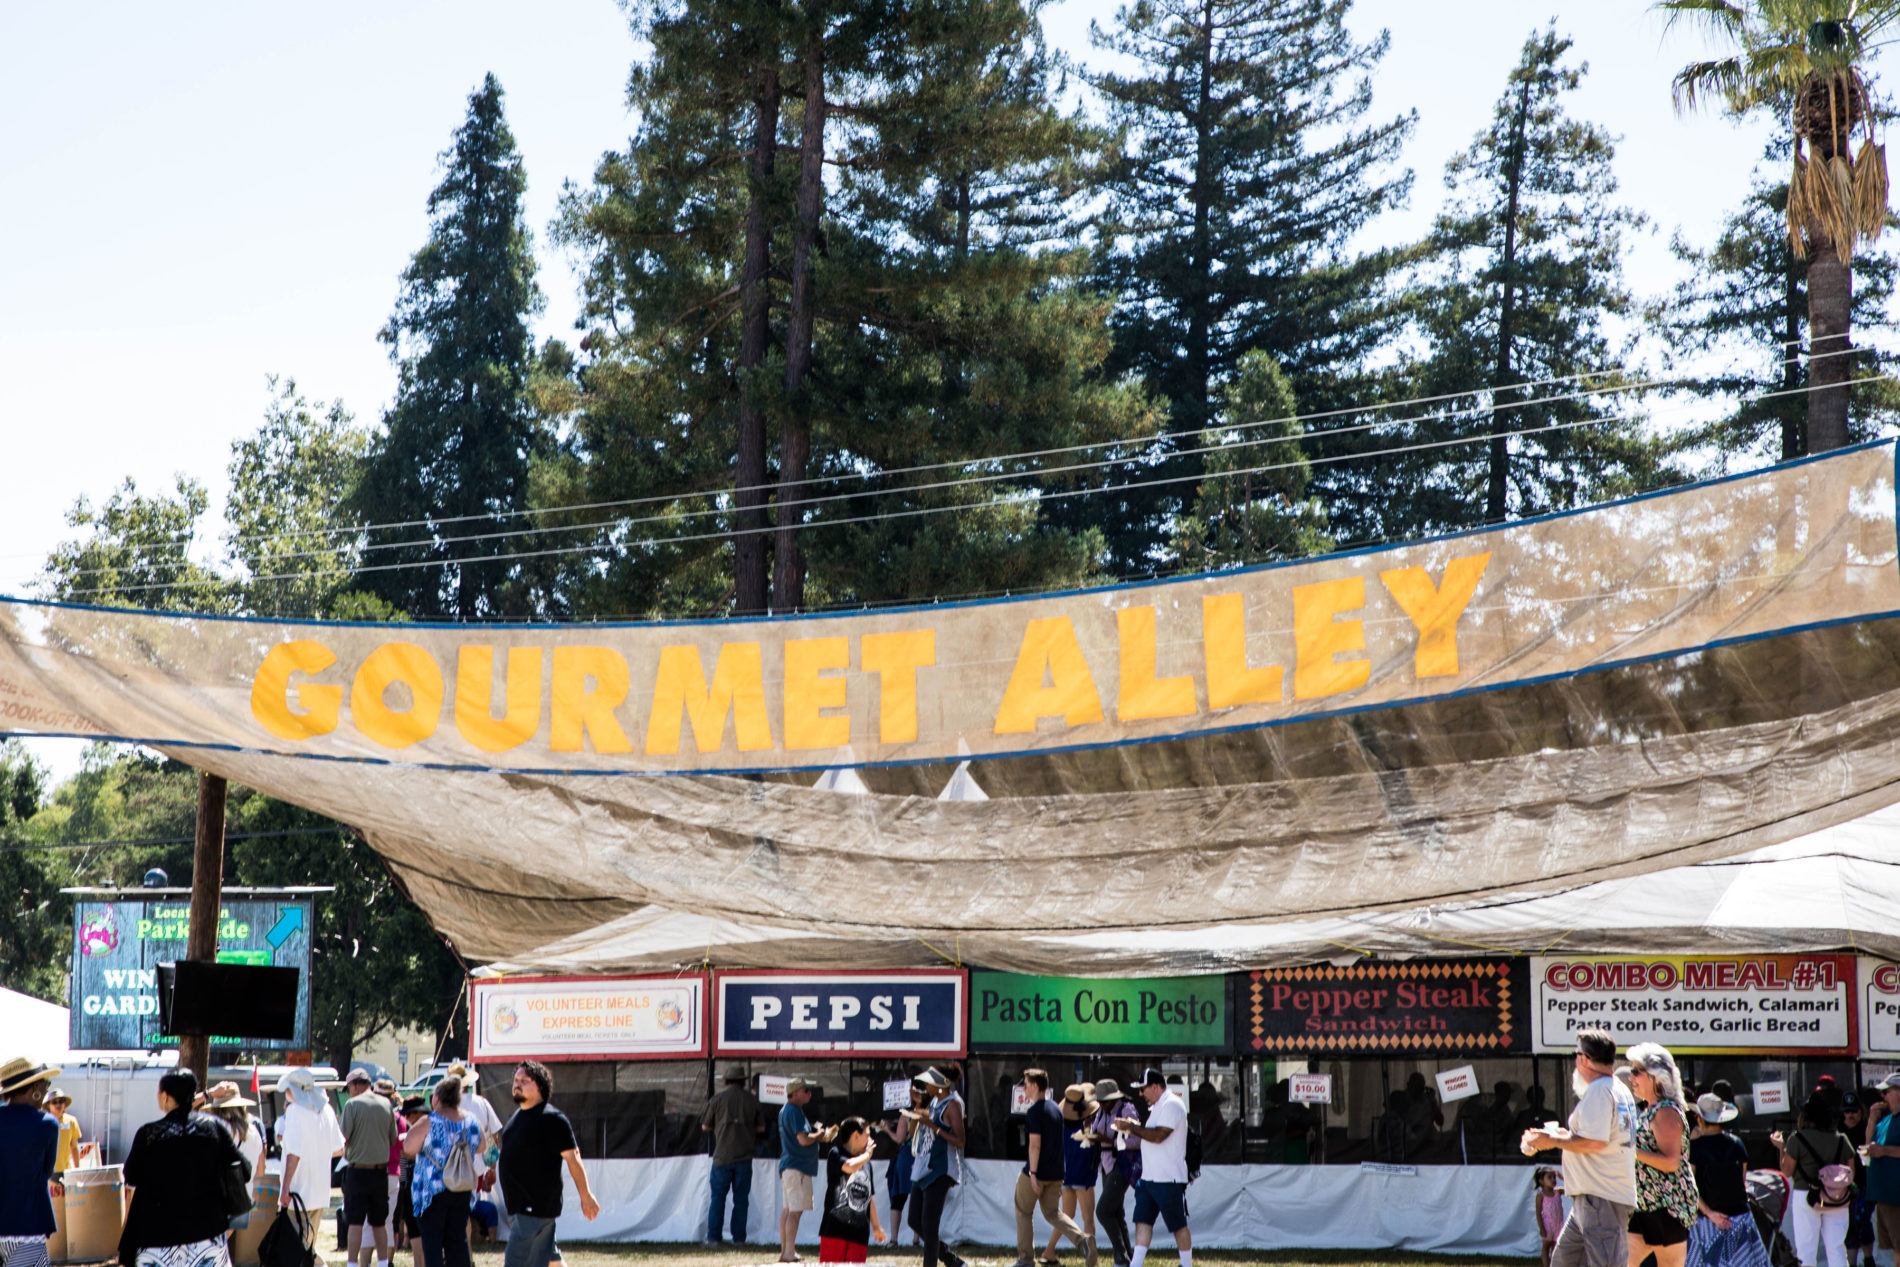 Gourmet Alley at the Gilroy Garlic Festival is where you can purchase all kinds of delicious garlicky foods to try.